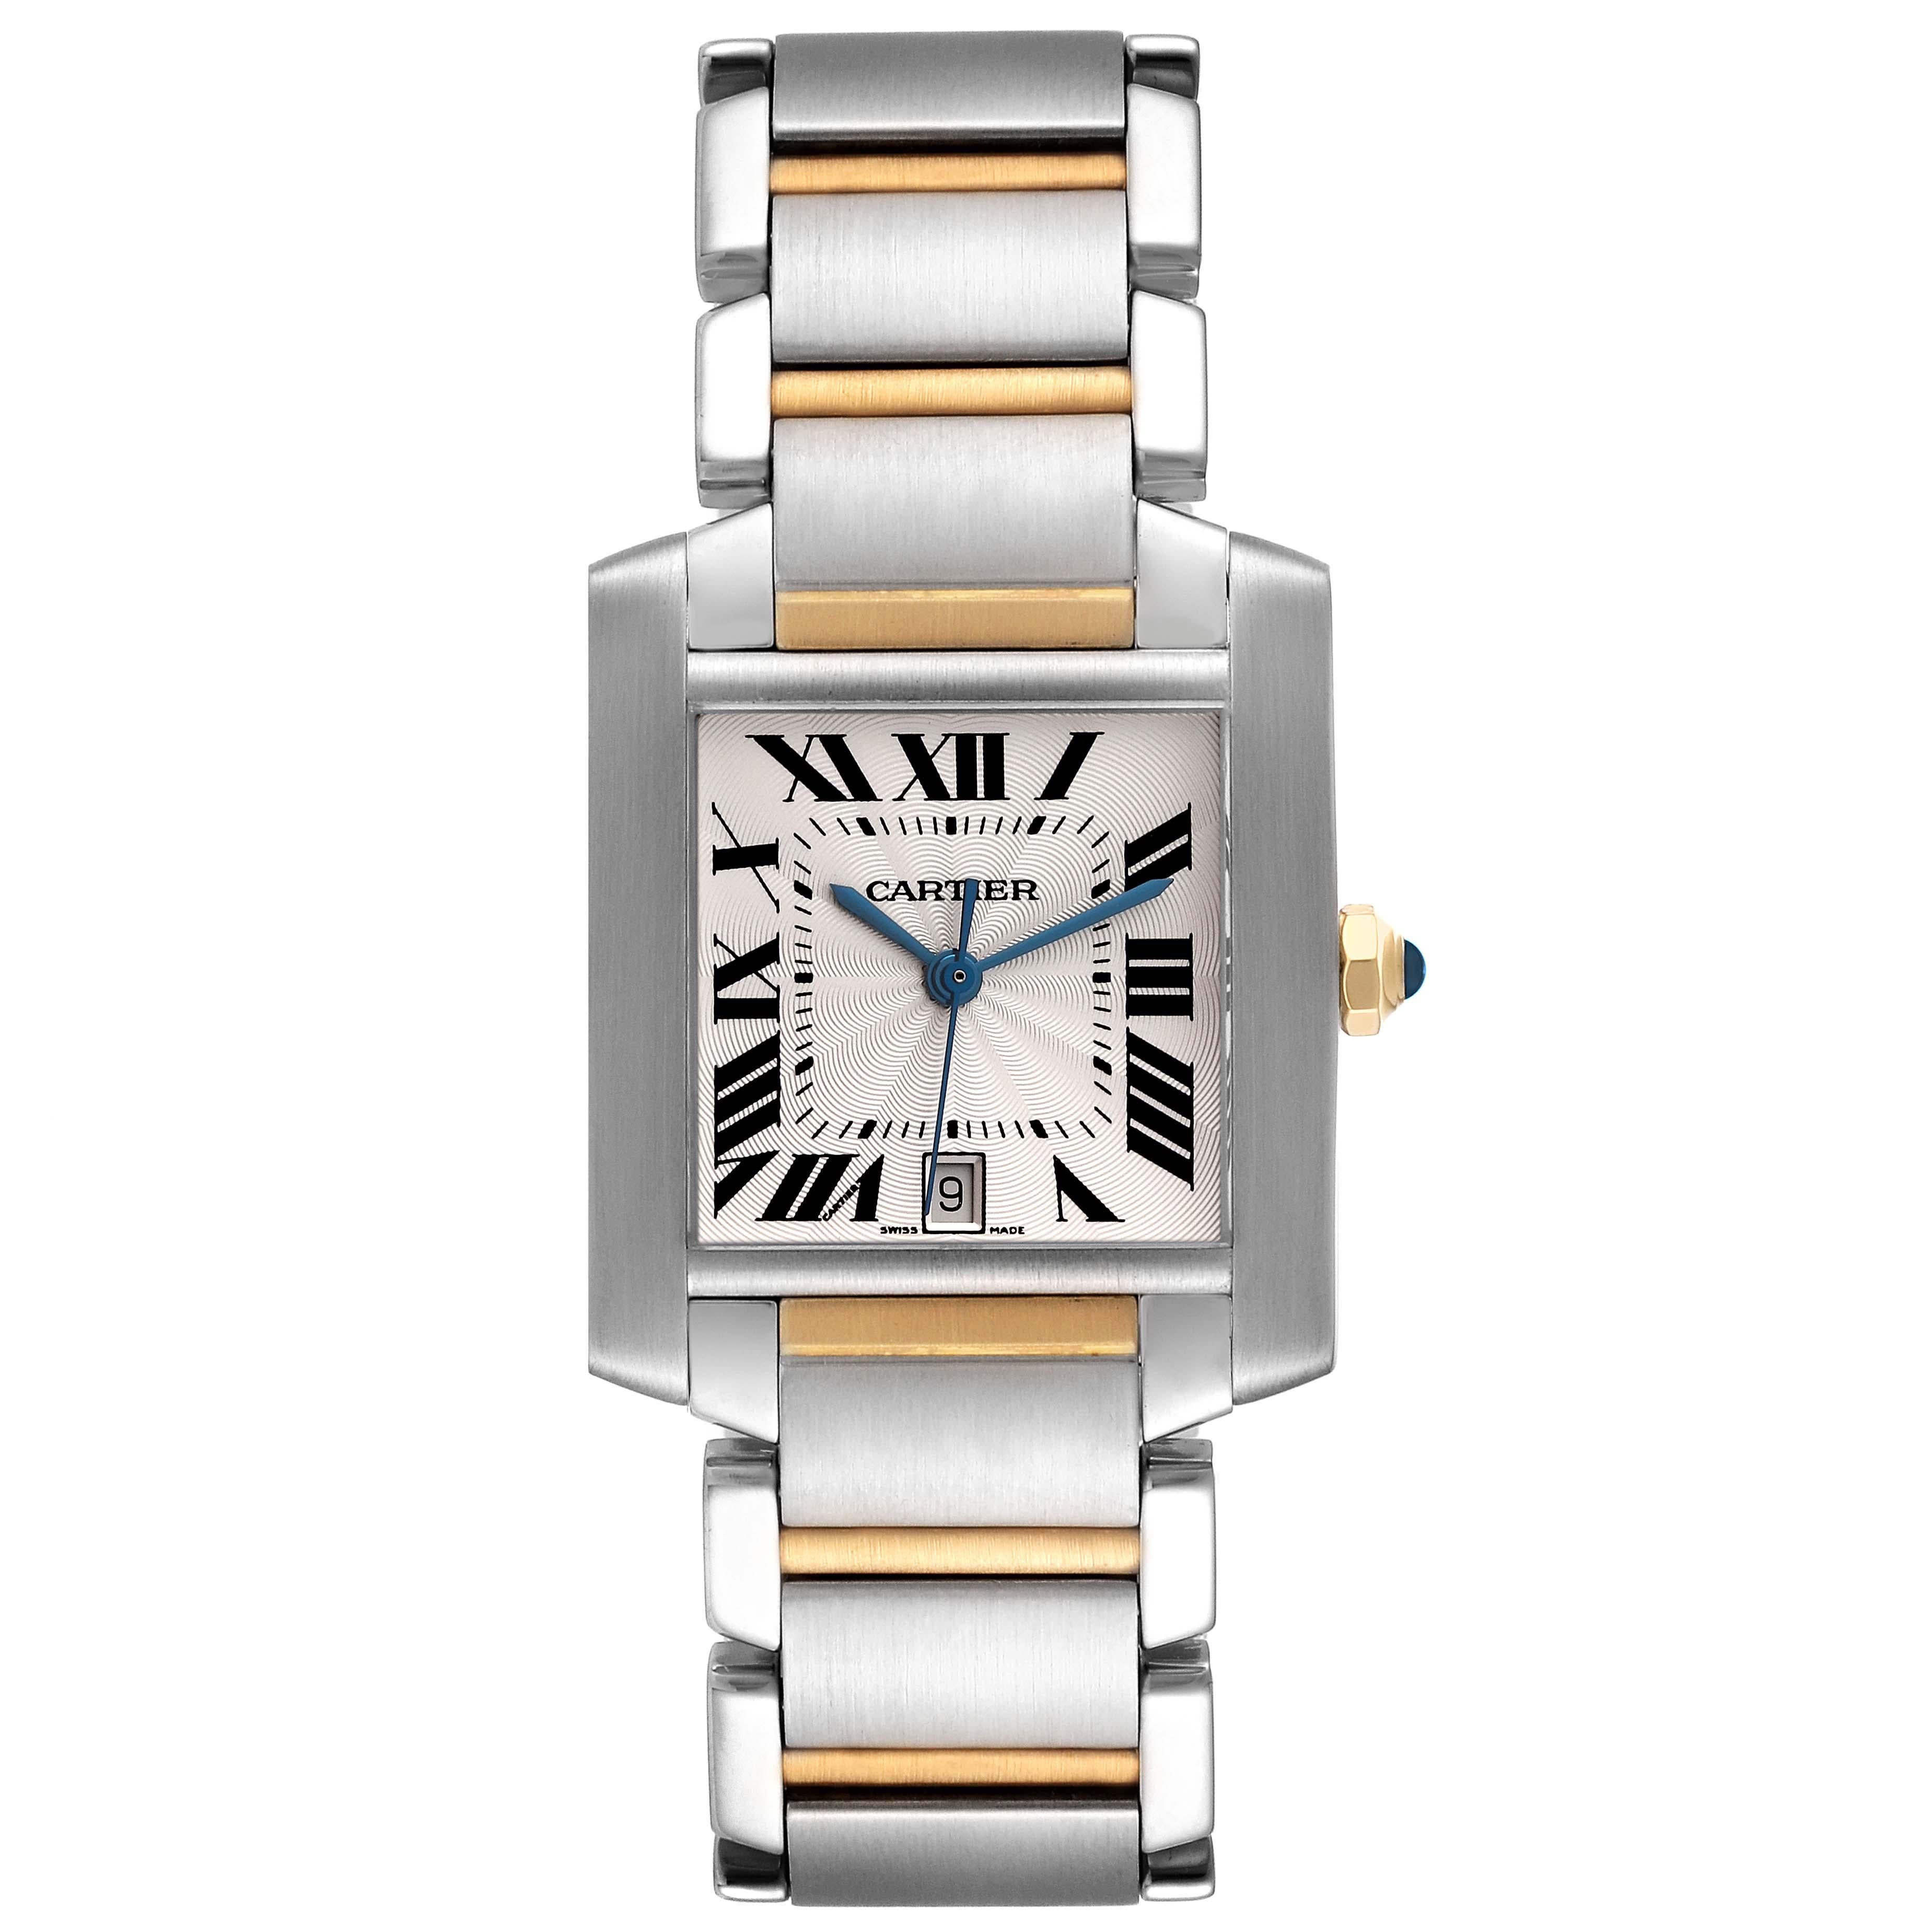 Cartier Tank Francaise Steel Yellow Gold Silver Dial Mens Watch W51005Q4 Papers. Automatic self-winding movement. Rectangular stainless steel 28.0 x 32.0 mm case. Octagonal 18K yellow gold crown set with a blue spinel cabochon. . Scratch resistant